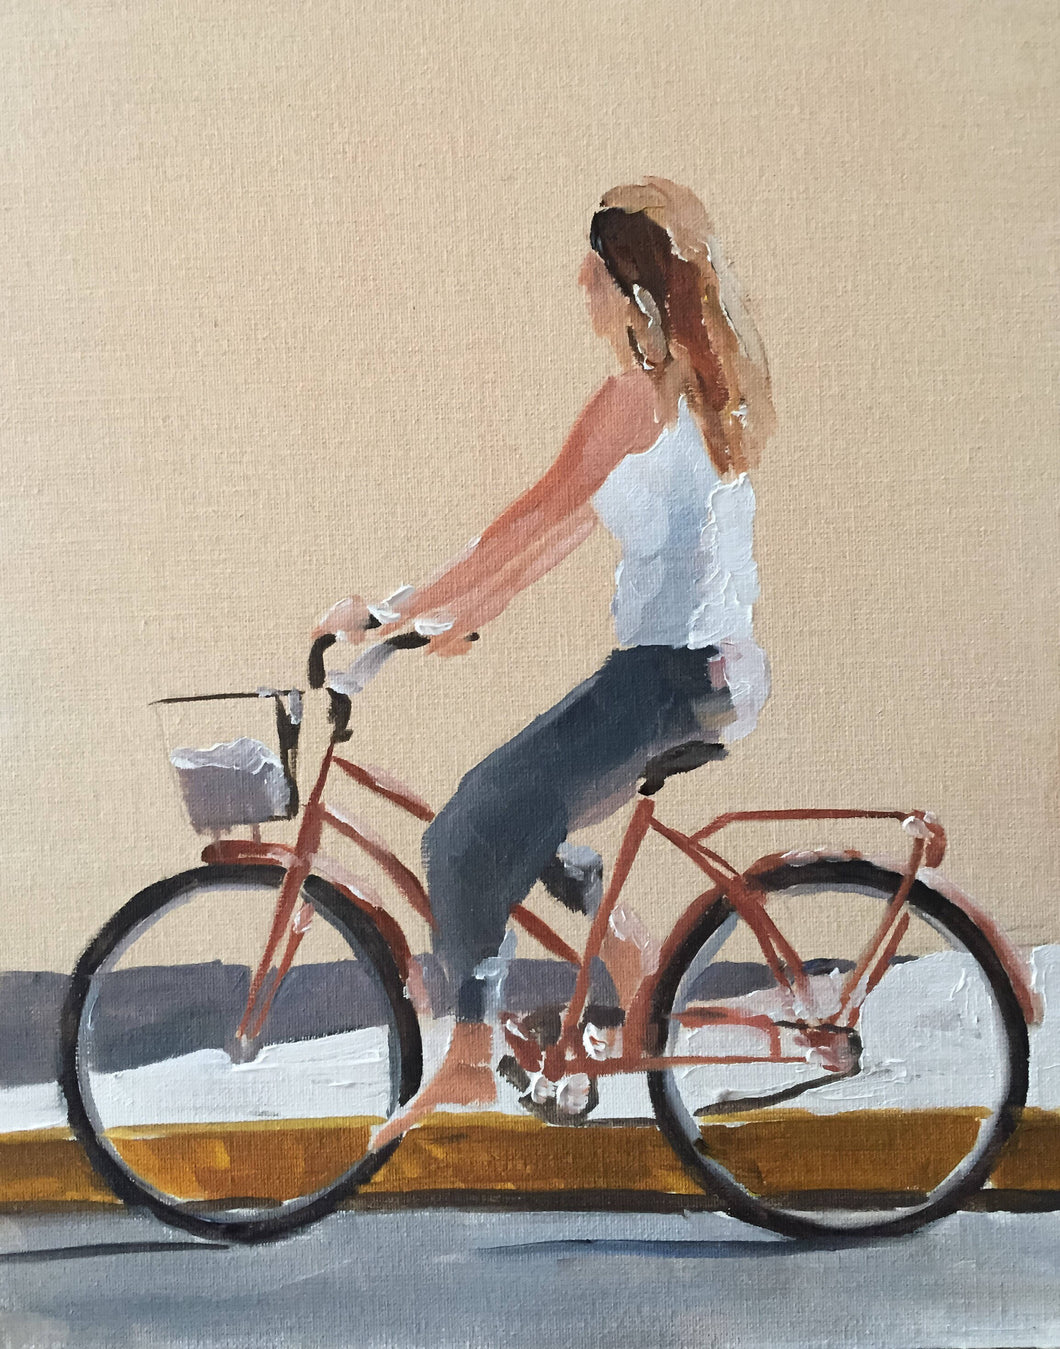 Woman cycling Painting, Prints, Posters, Originals, Commissions, Fine Art - from original oil painting by James Coates